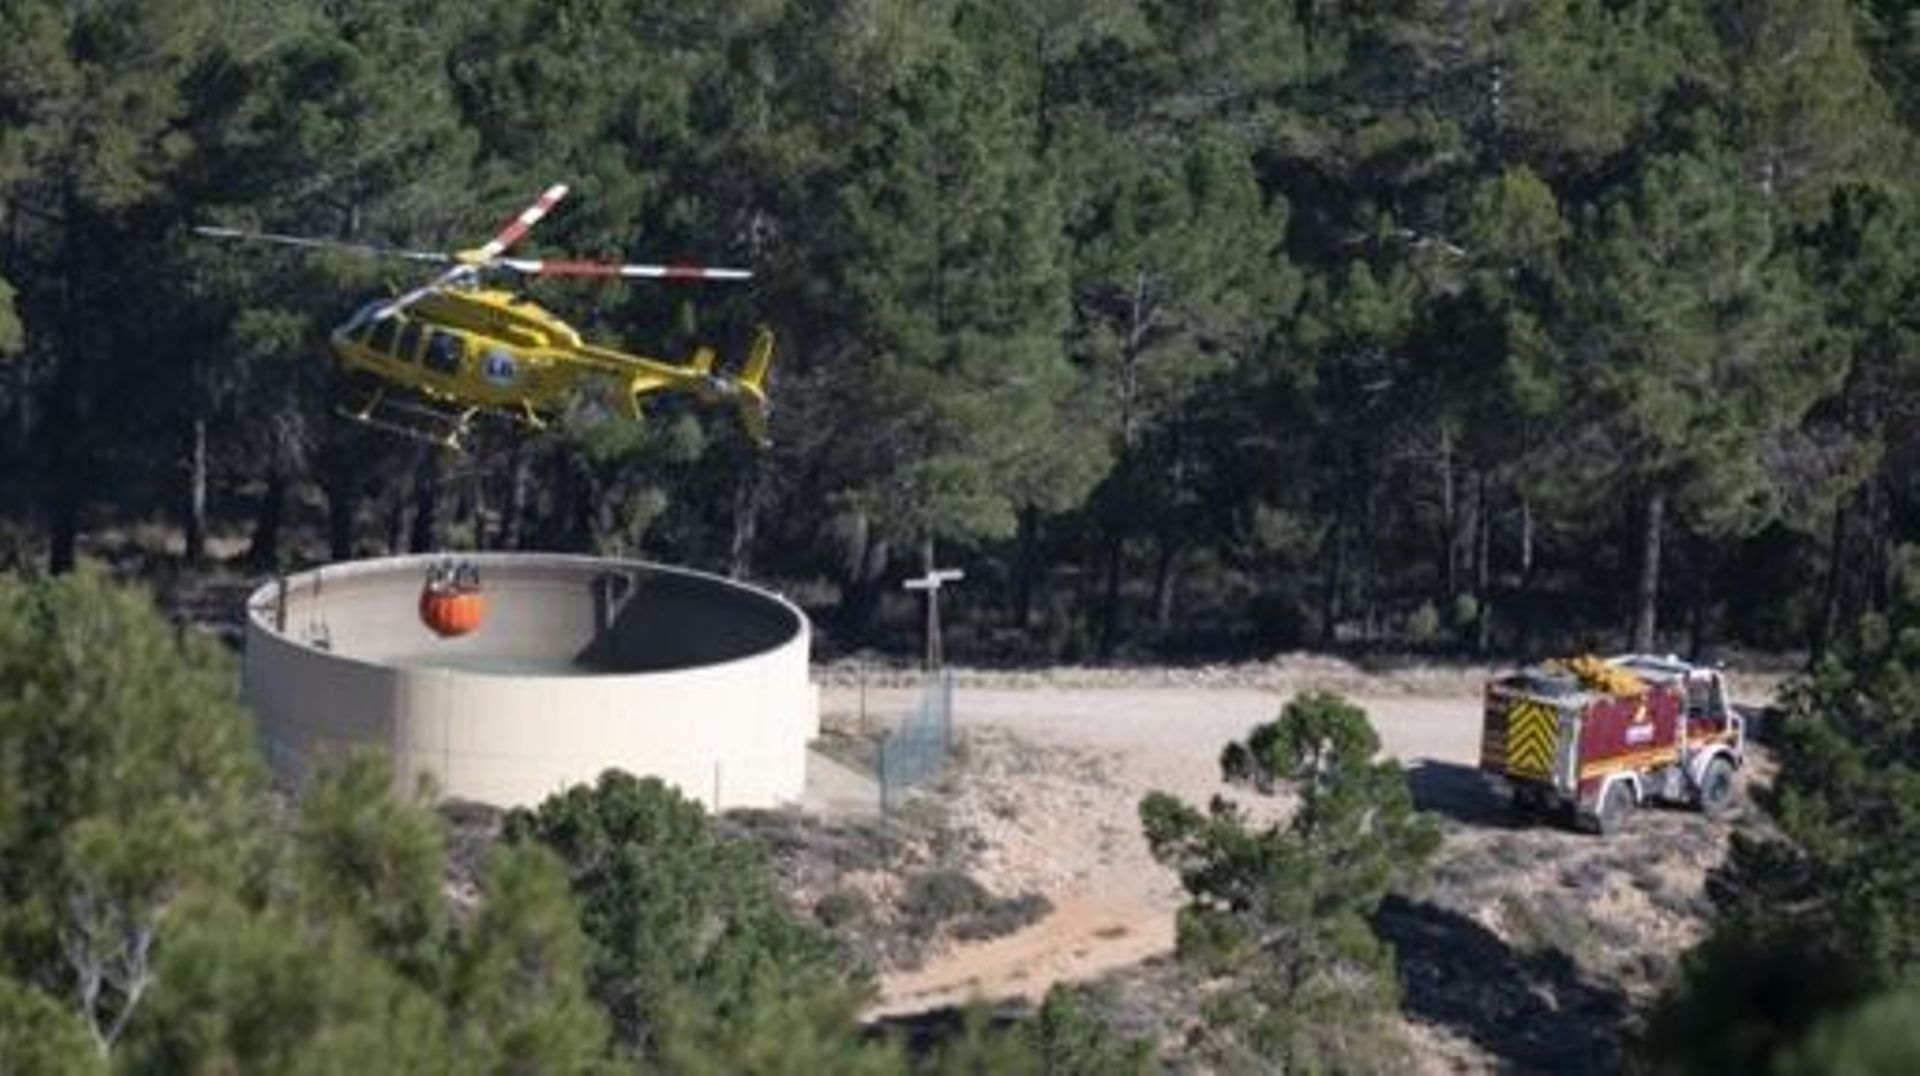 A helicopter loads water near the village of Los Peiros, on March 25, 2023, to fight a wildfire that began on March 23, 2023 near Villanueva de Viver, some 90 kilometres (55 miles) north of Valencia. Hundreds of firefighters today were battling Spain’s fi